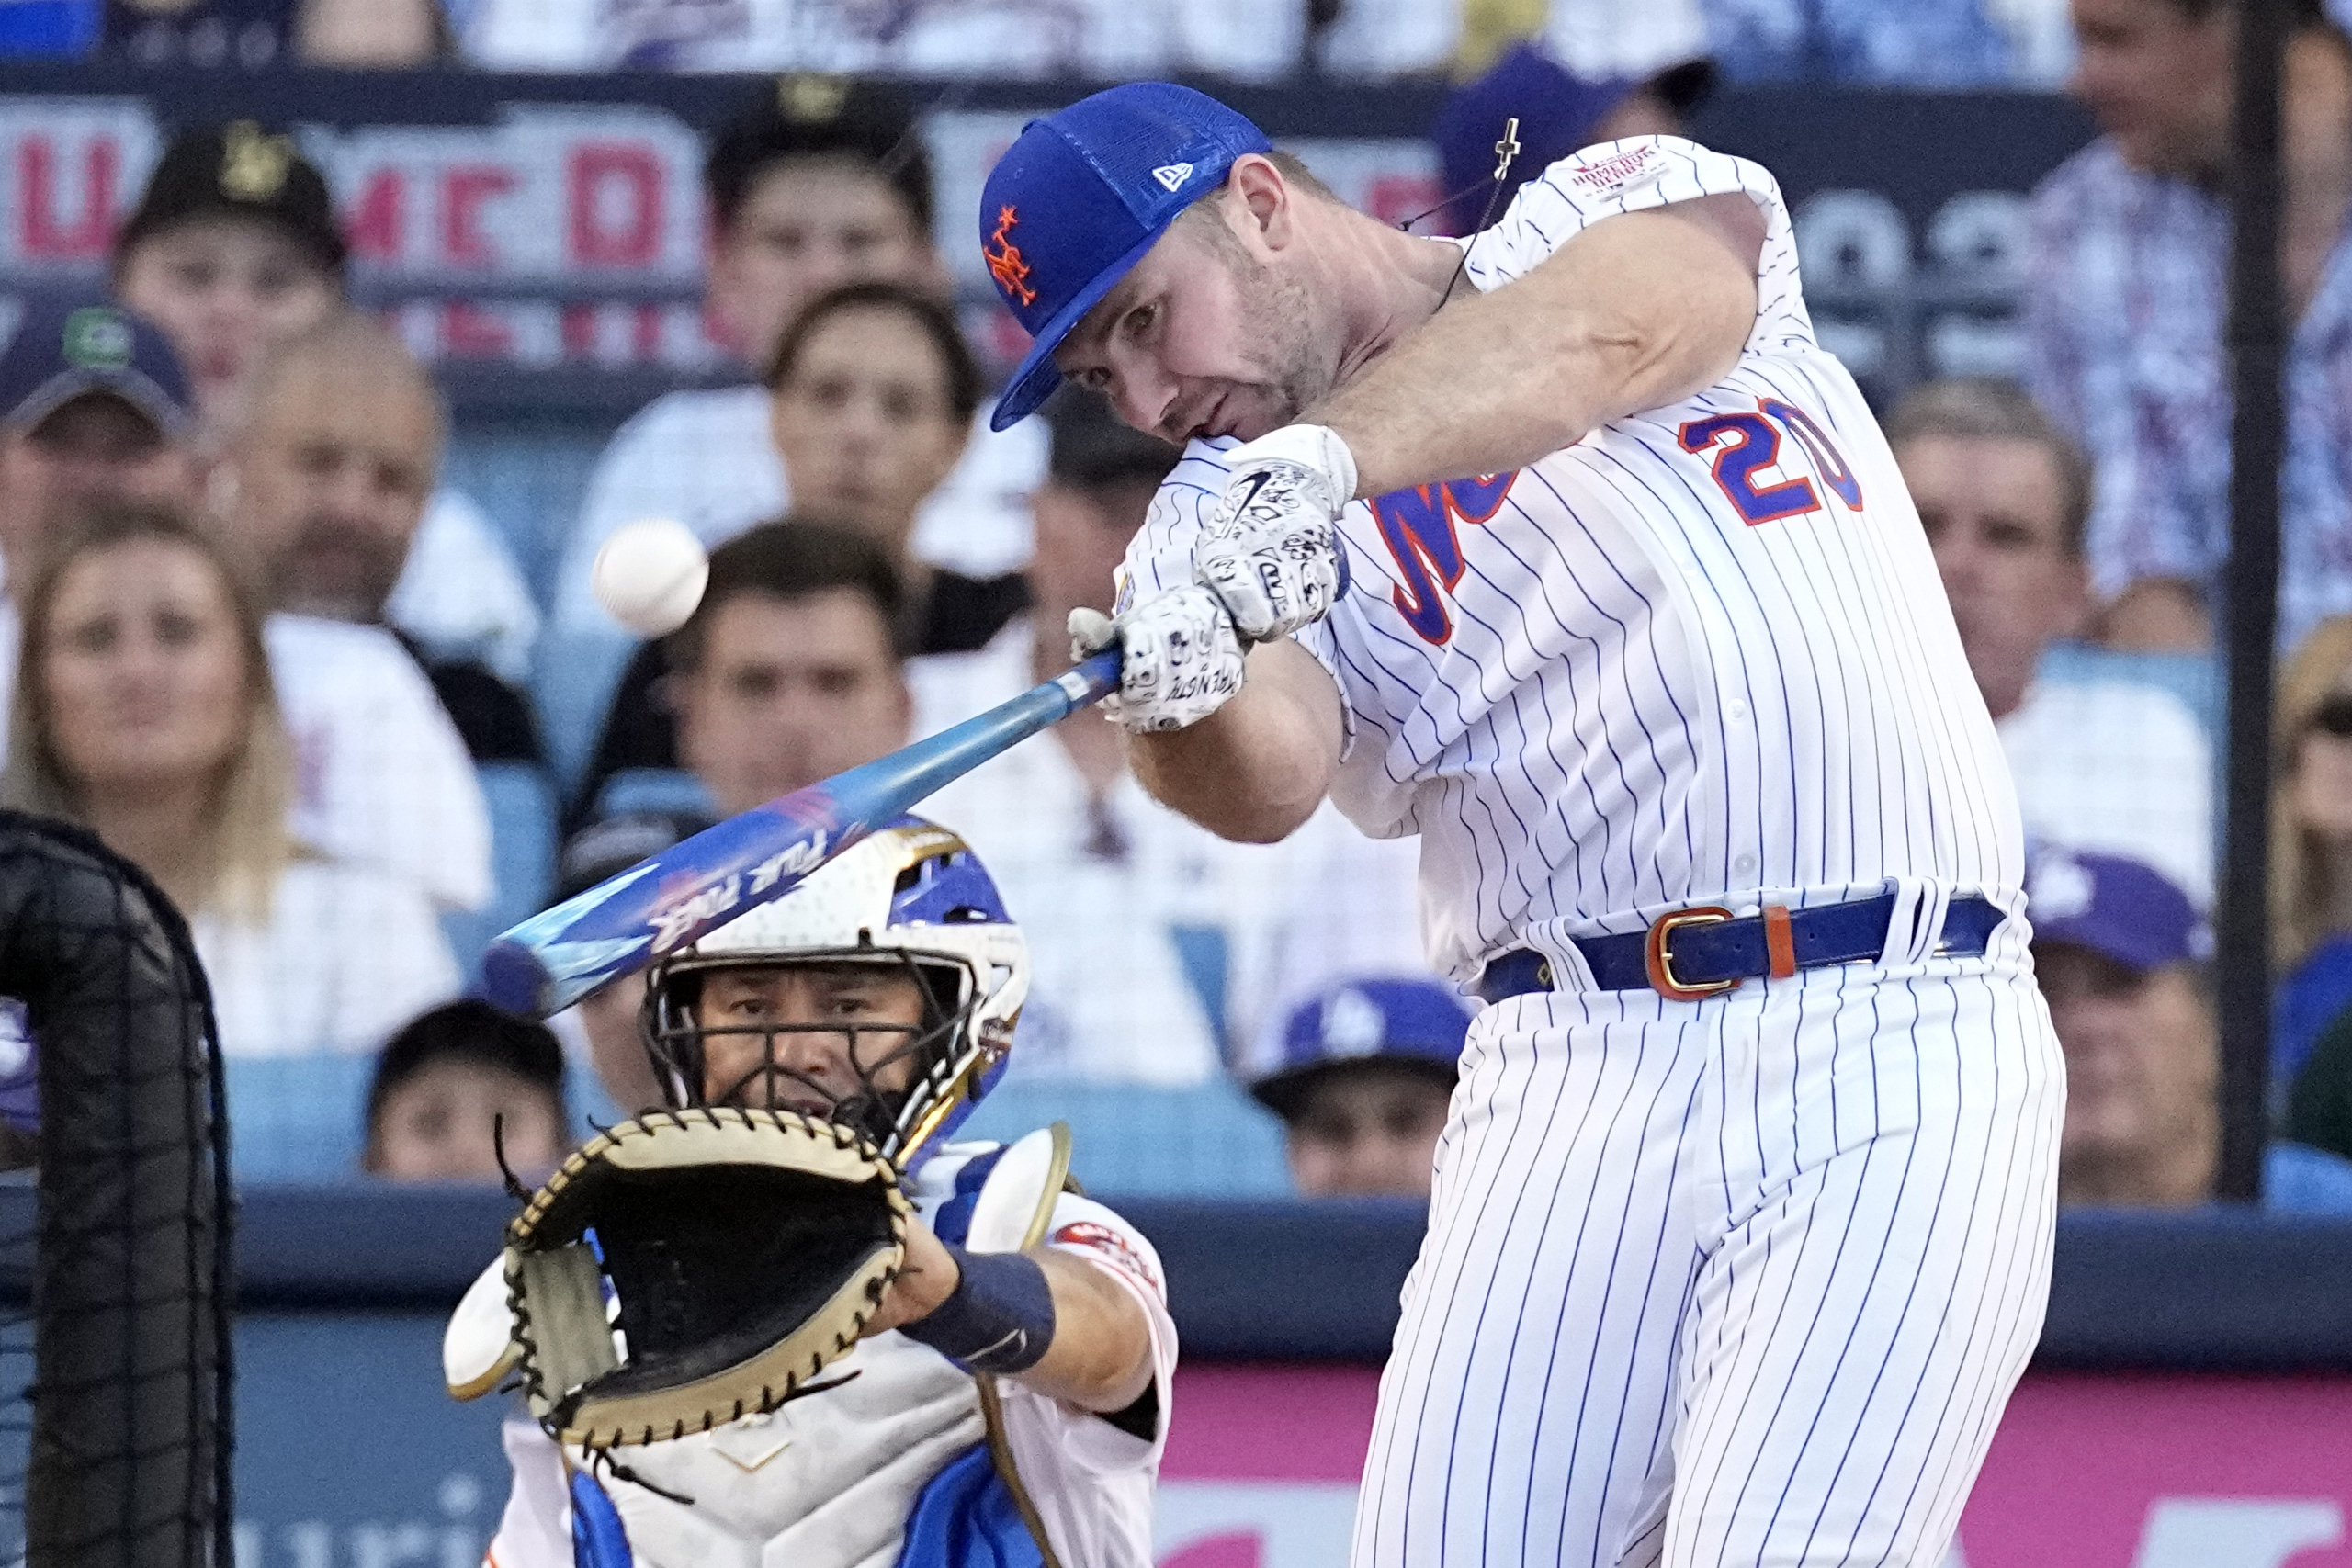 Home Run Derby 2023 free live stream (7/10/23) Time, bracket, TV channel, how to watch MLB All-Star 2023 events online